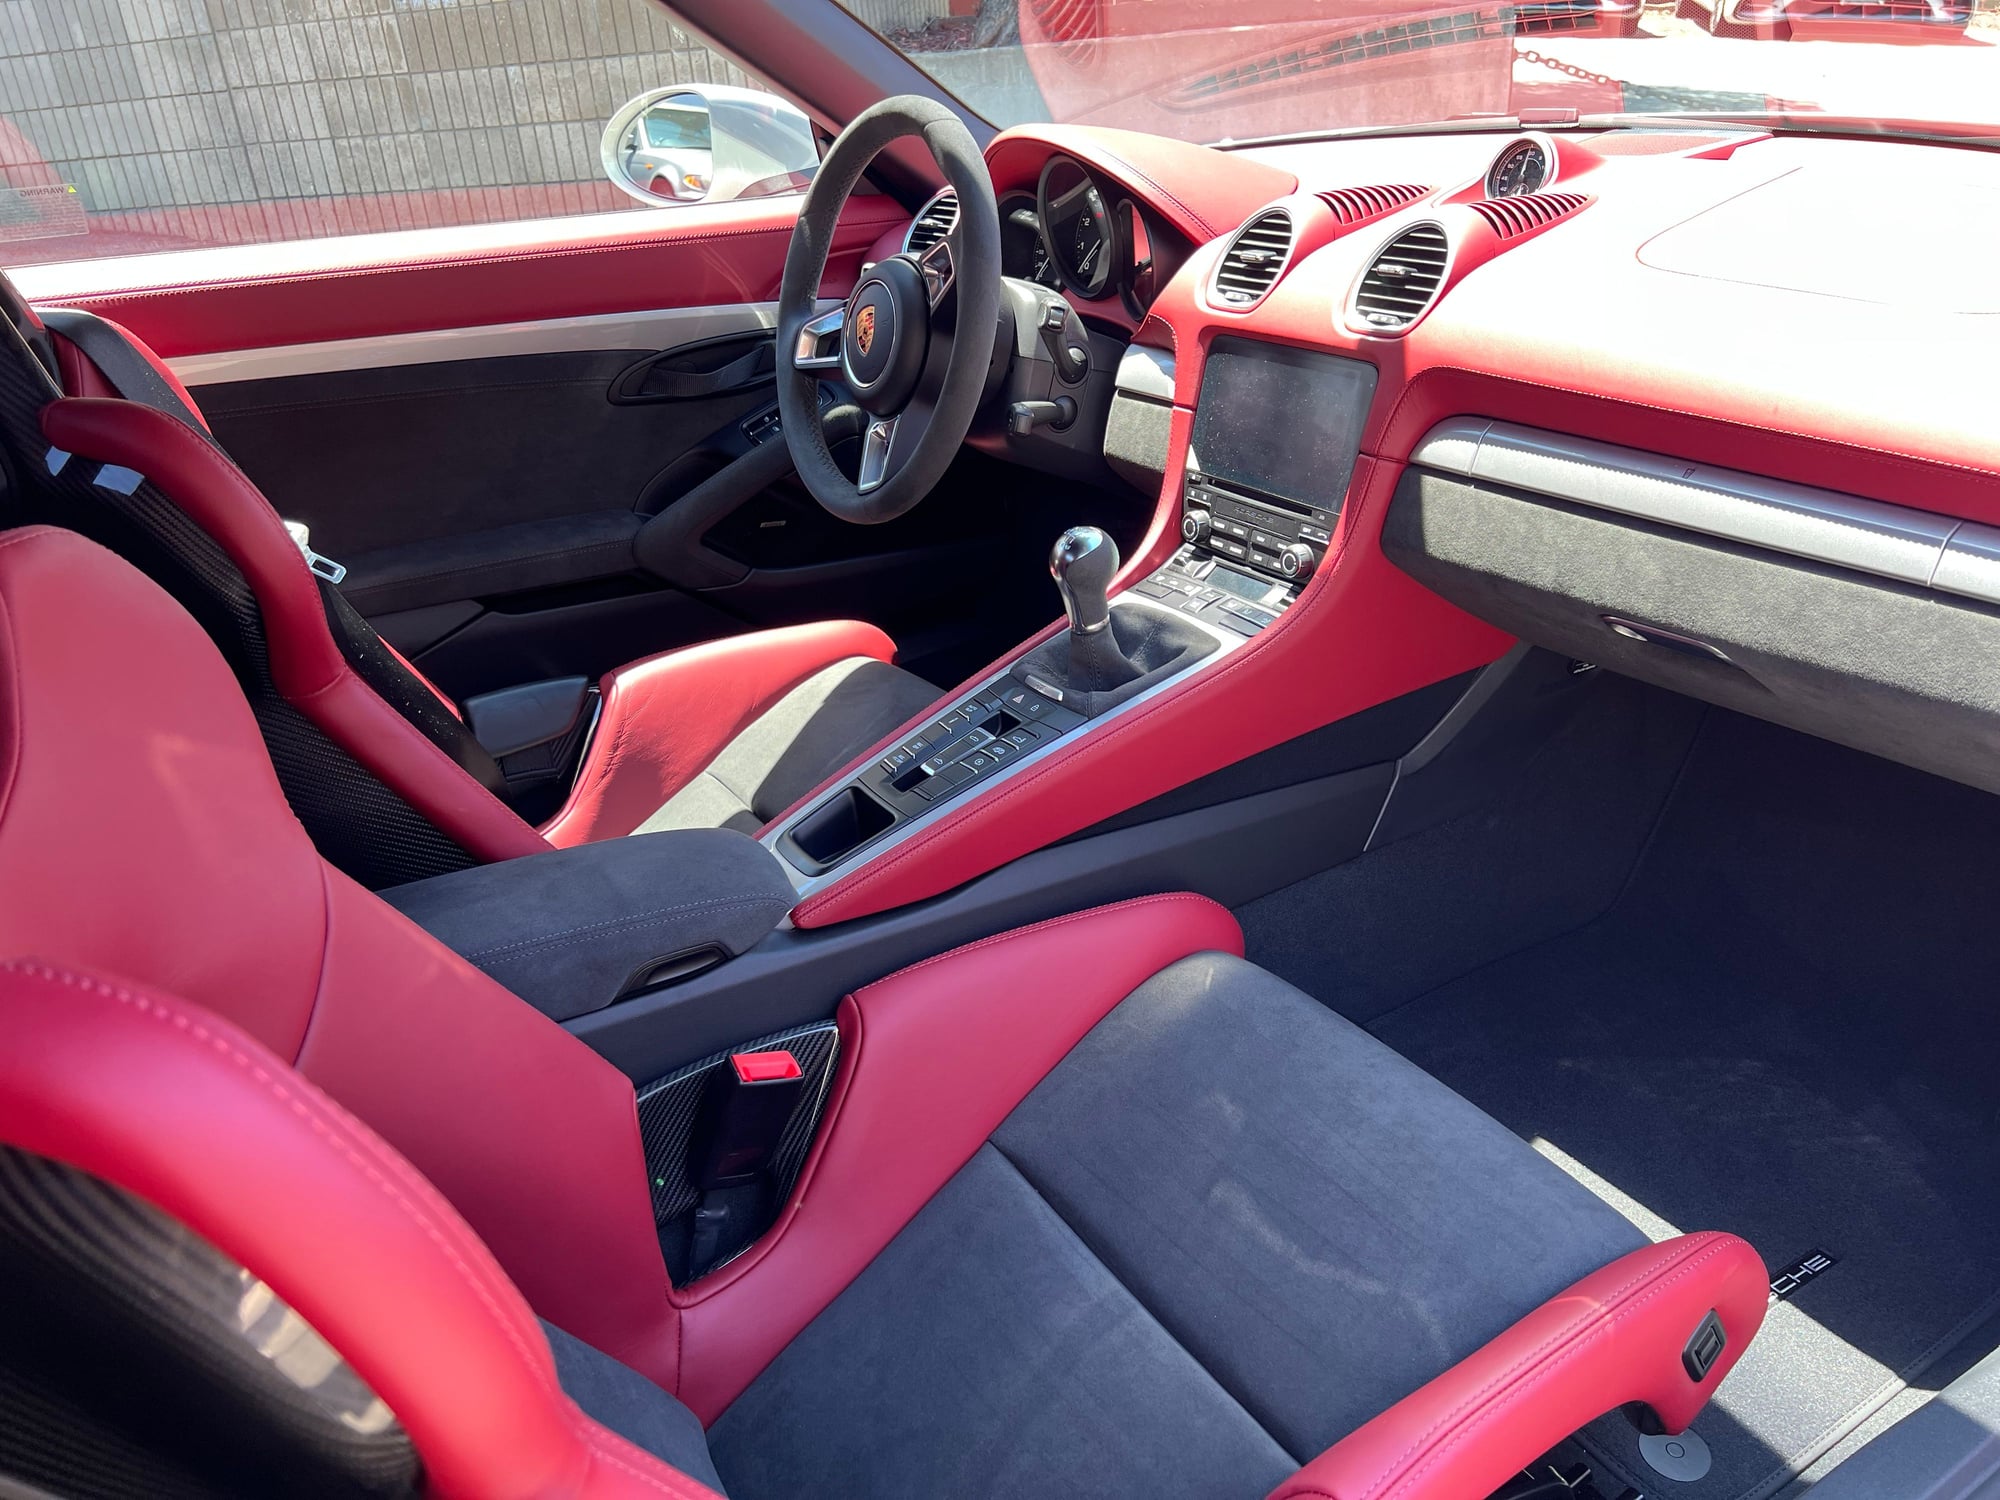 2022 Porsche 718 - 2022 718 Spyder for sale - Used - VIN WP0CC2A80NS235434 - 3,750 Miles - 6 cyl - 2WD - Manual - Convertible - Gray - Pleasanton, CA 94566, United States